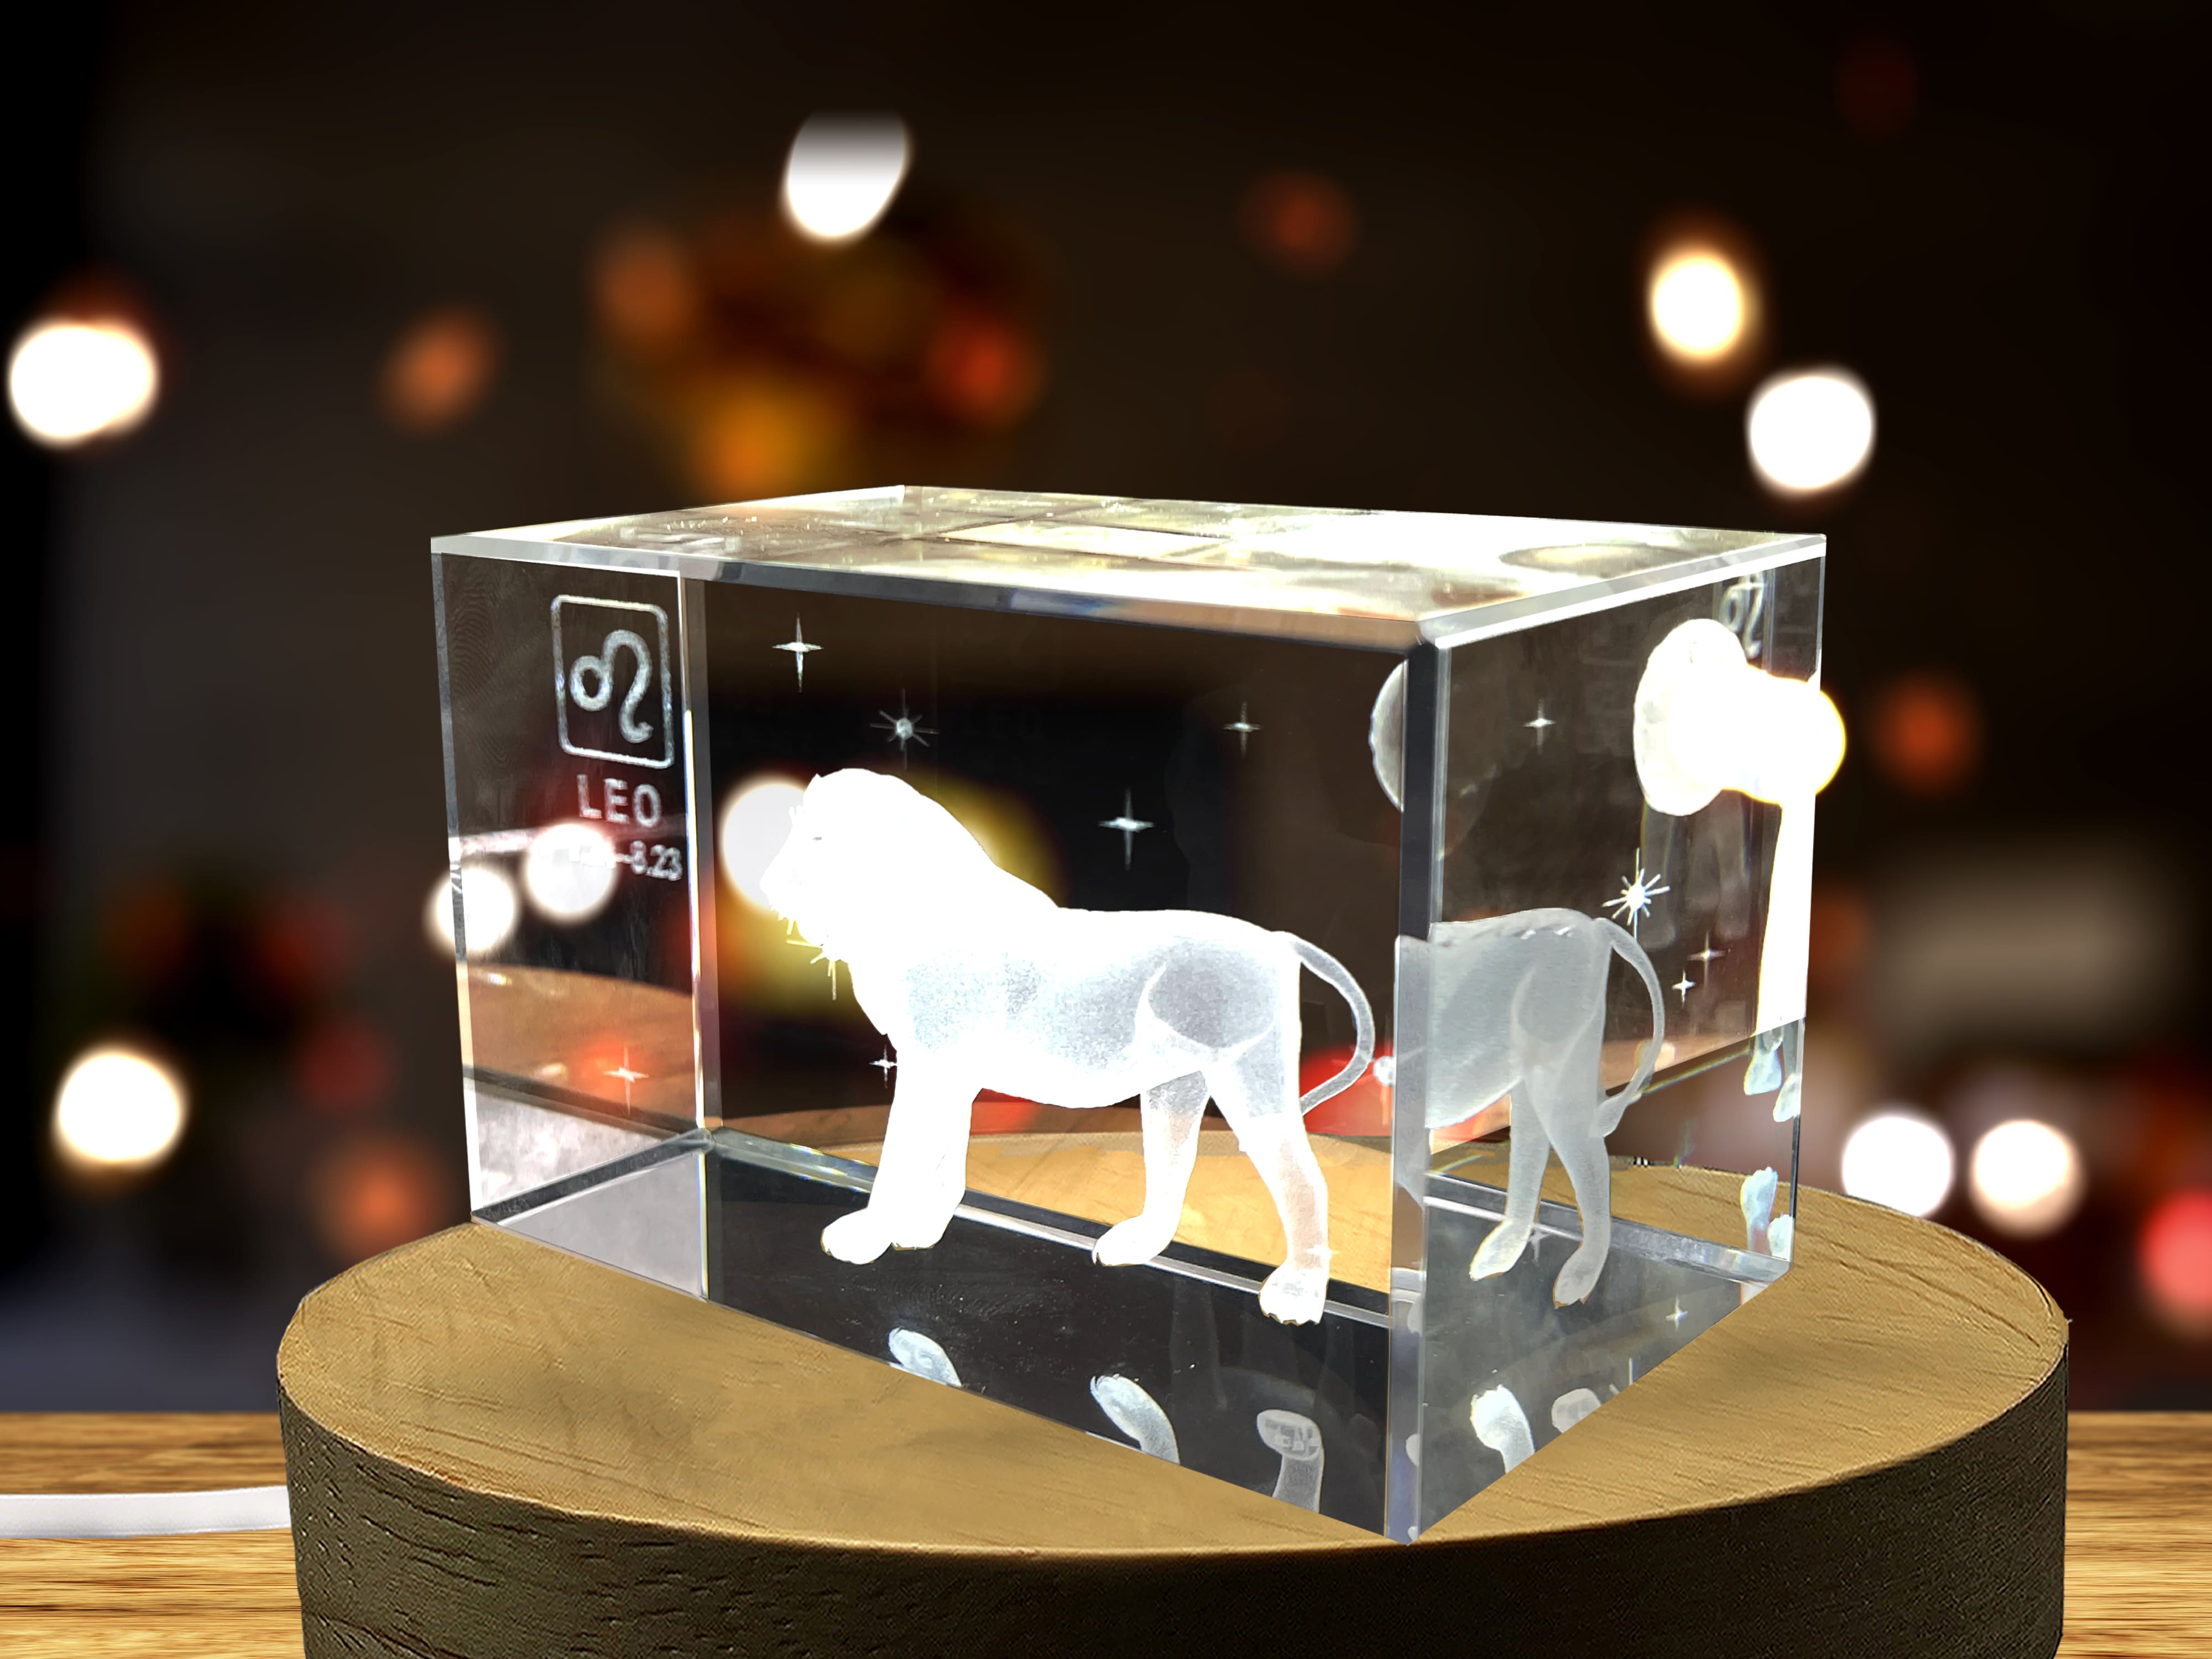 Leo Zodiac Sign 3D Engraved Crystal Keepsake Gift with Free LED Base Light A&B Crystal Collection